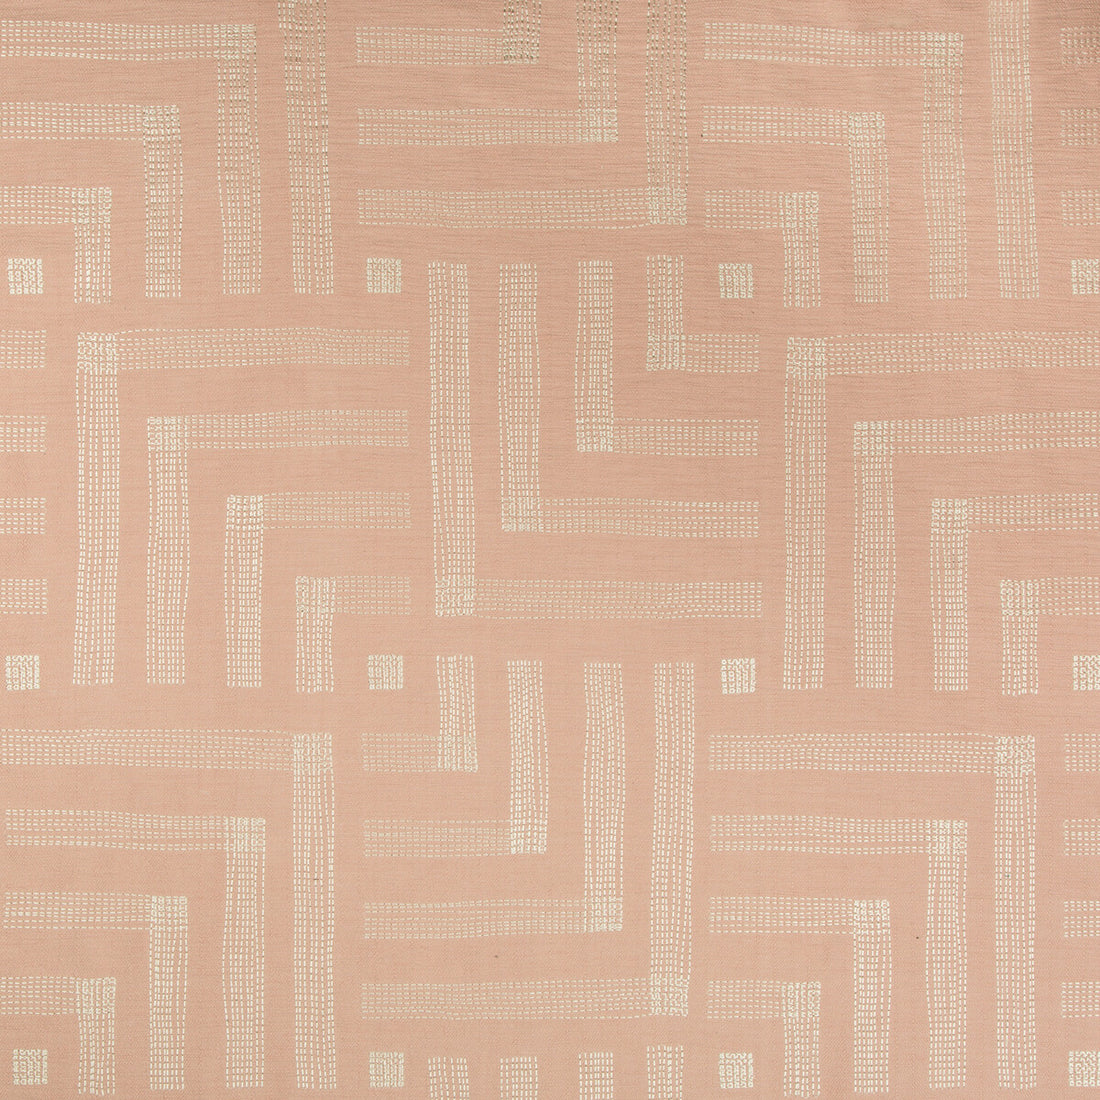 Pastiche fabric in rouge/ivory color - pattern GWF-3726.171.0 - by Lee Jofa Modern in the Kelly Wearstler IV collection